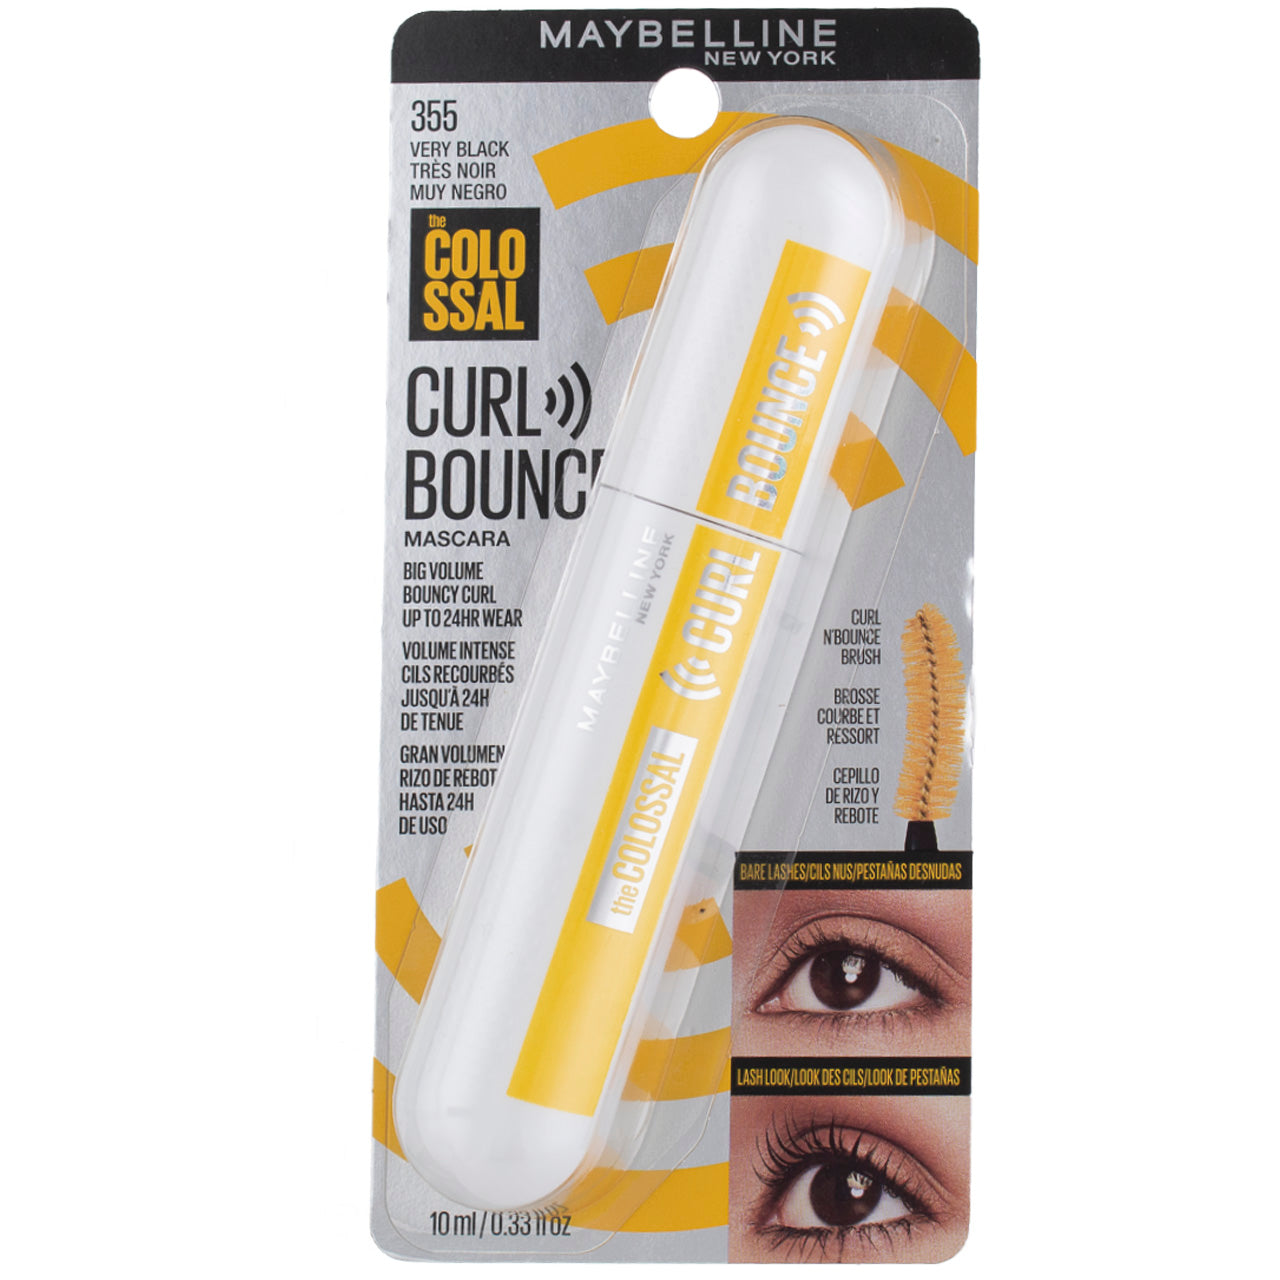 Vitabox Black Mascara, fl Curl Bouncing The 0.33 – 355, Colossal Very Maybelline